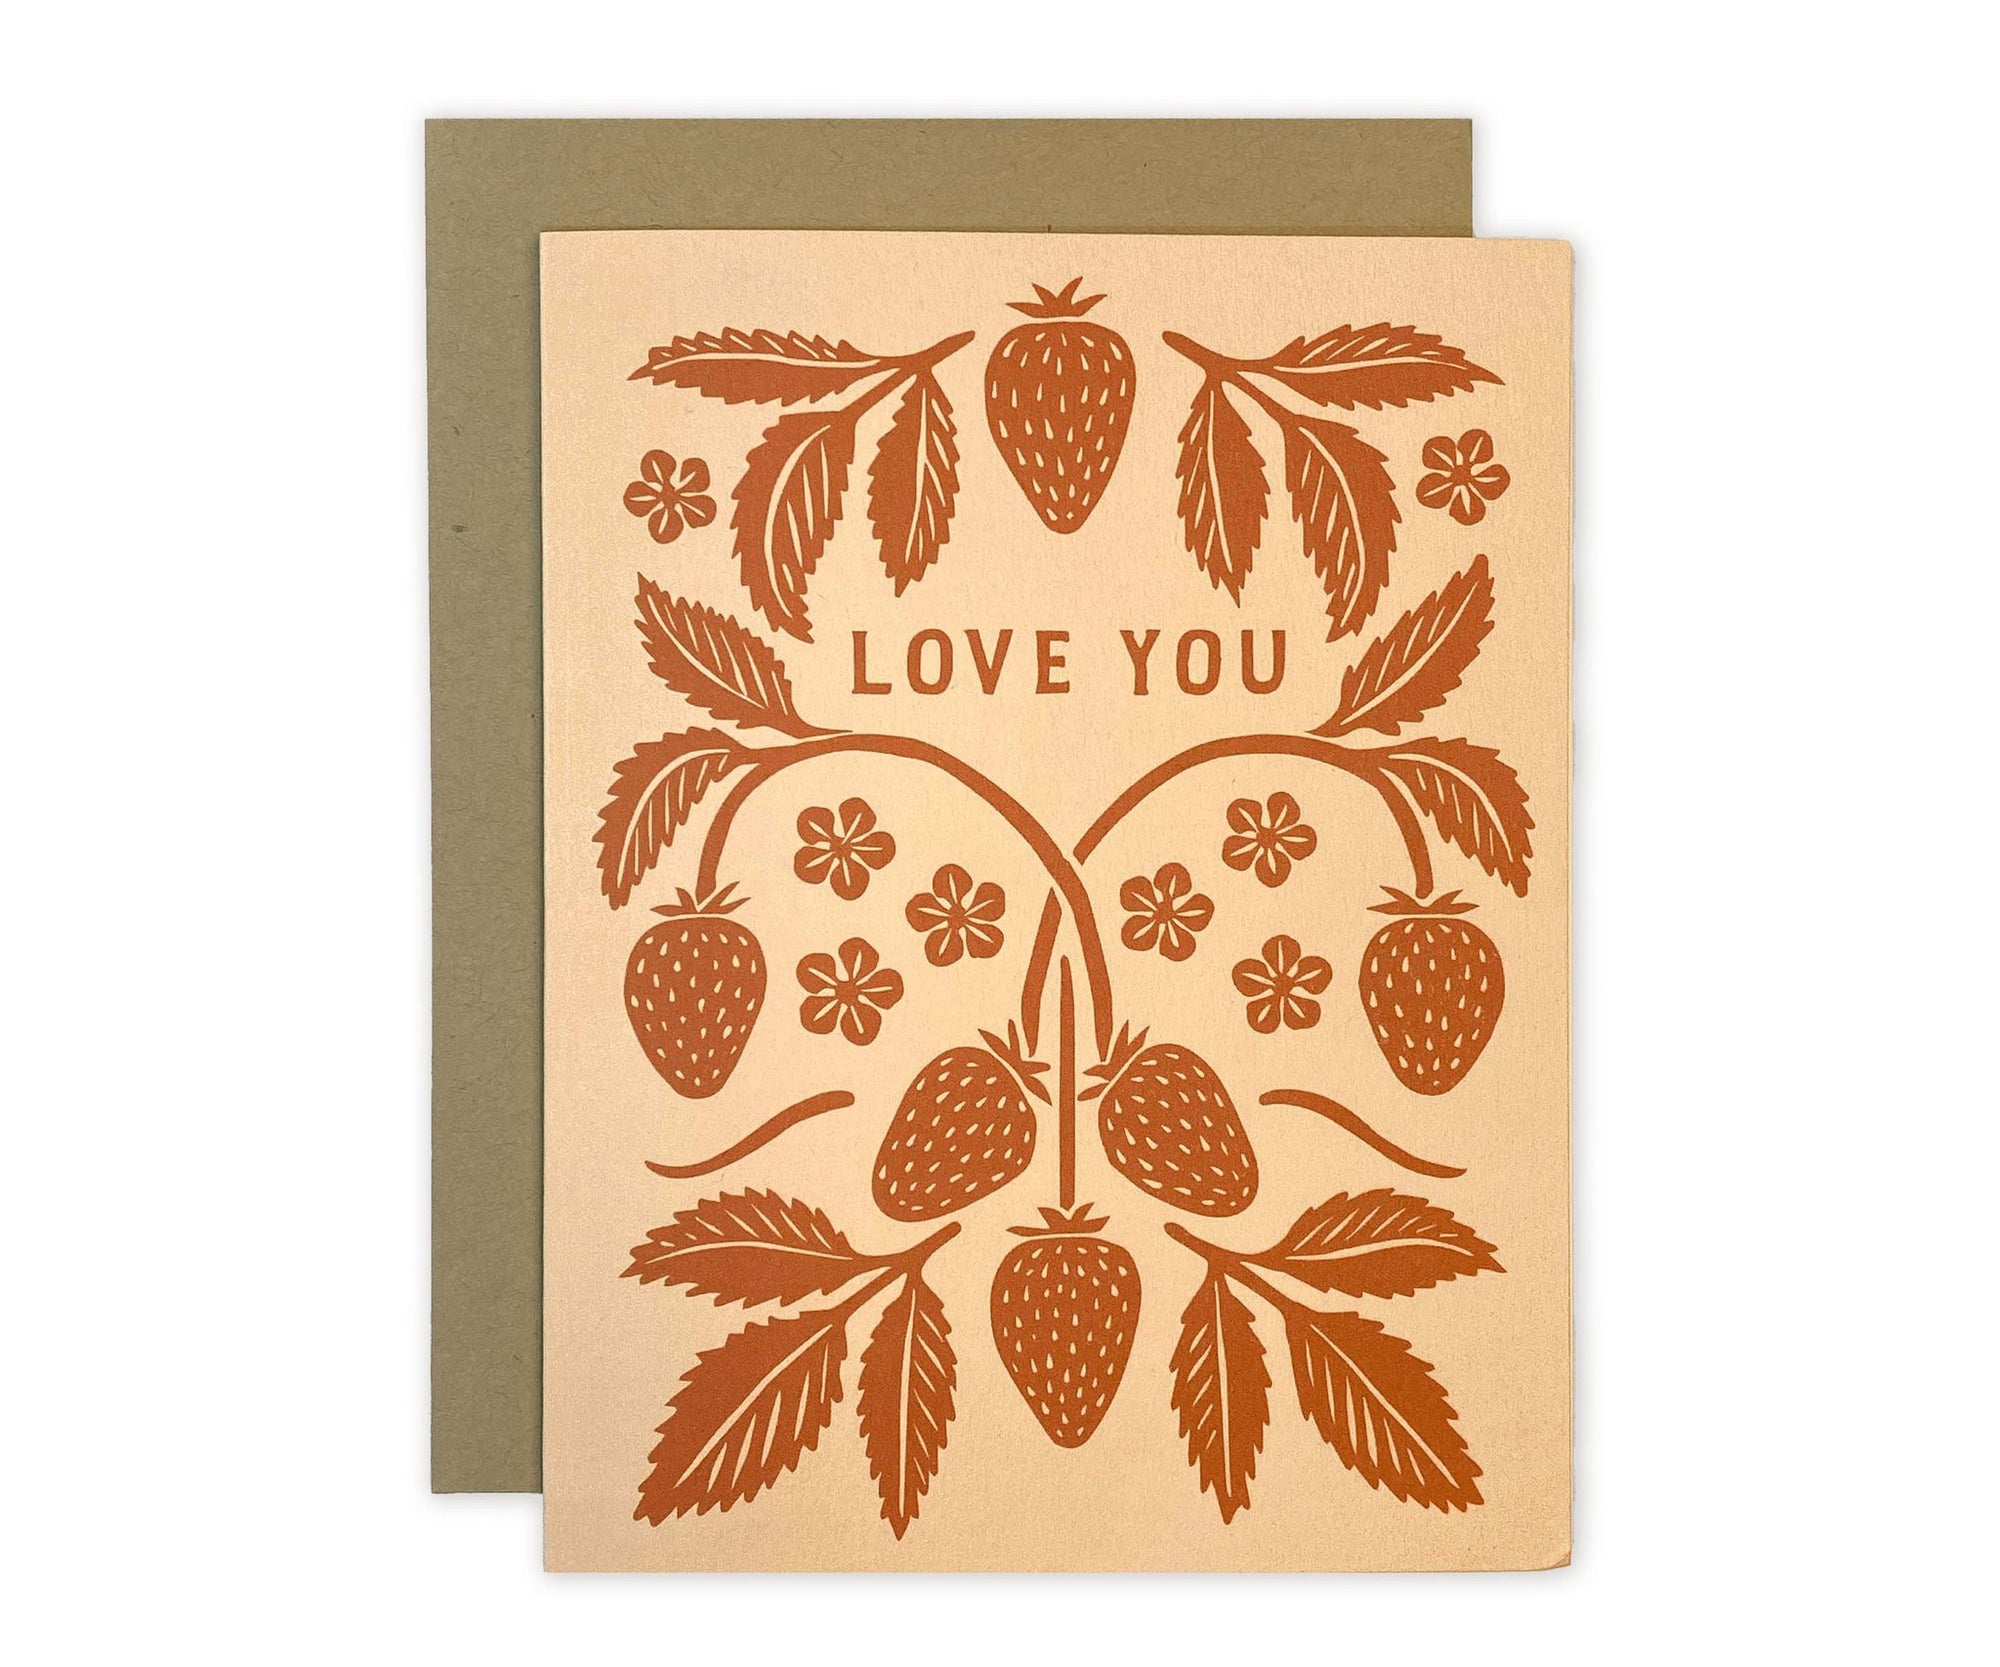 A Love You Strawberry Floral Greeting Card with the brand name The Wild Wander.